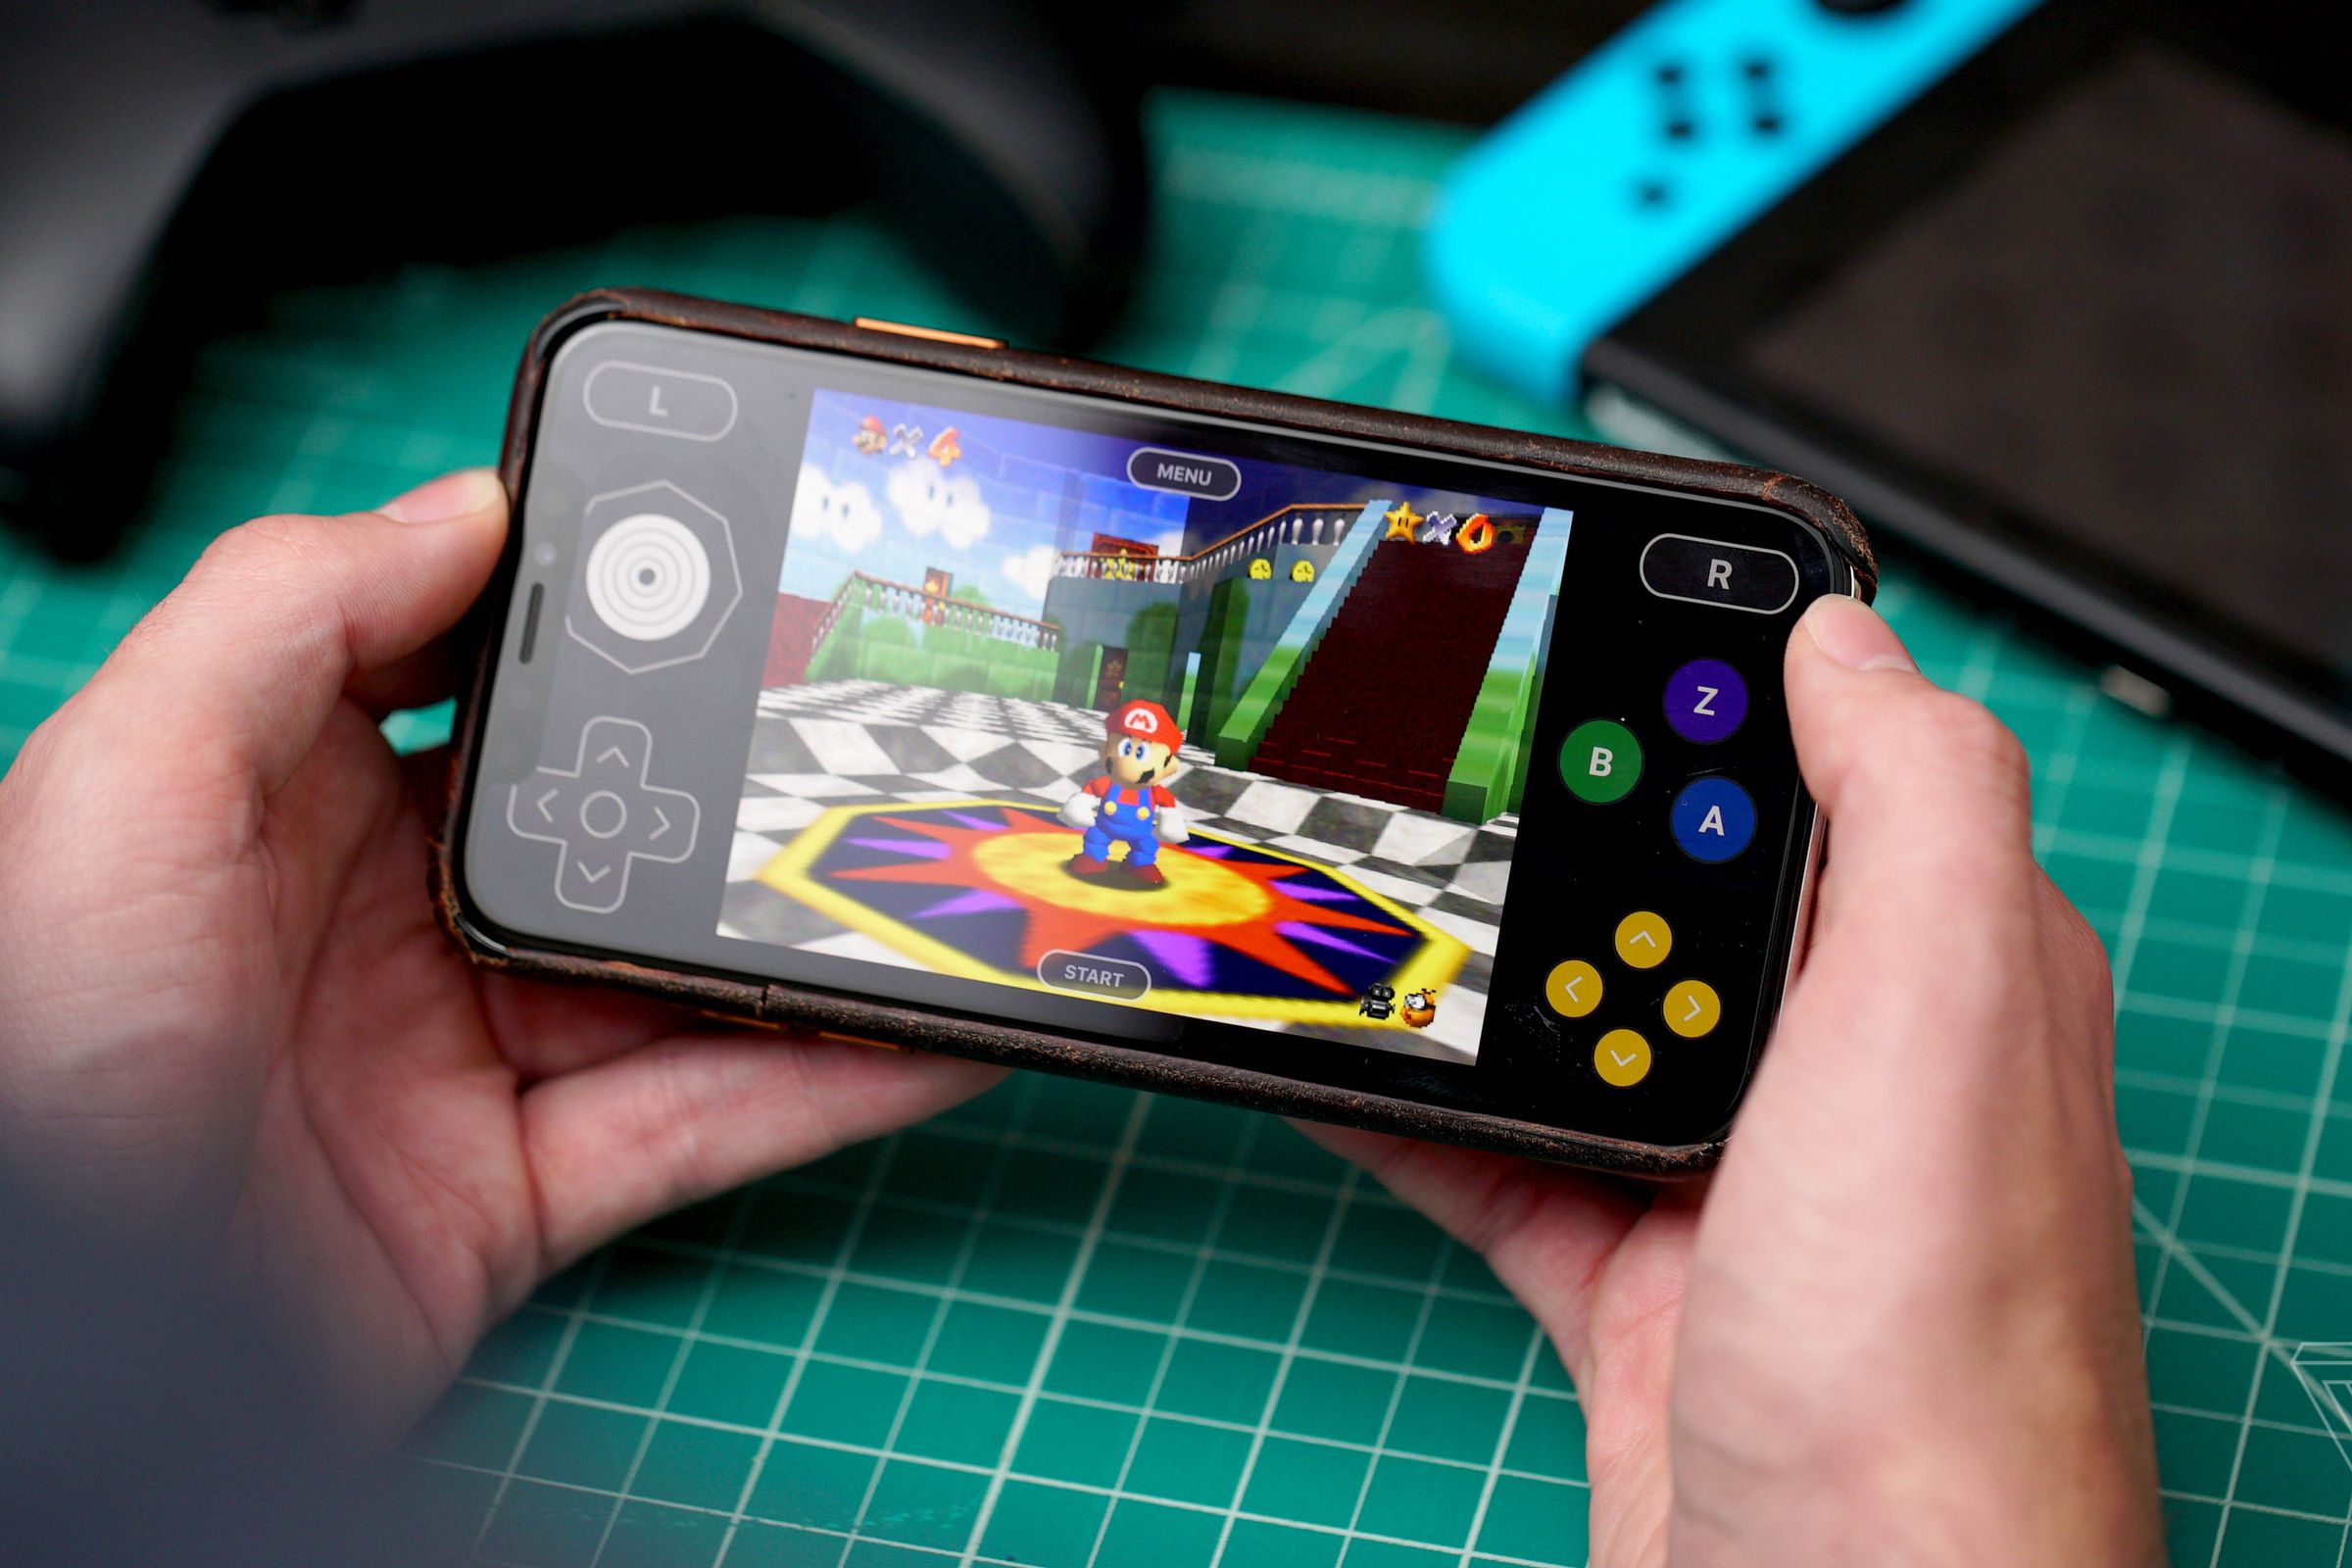 A picture of Super Mario 64 running on an iPhone.